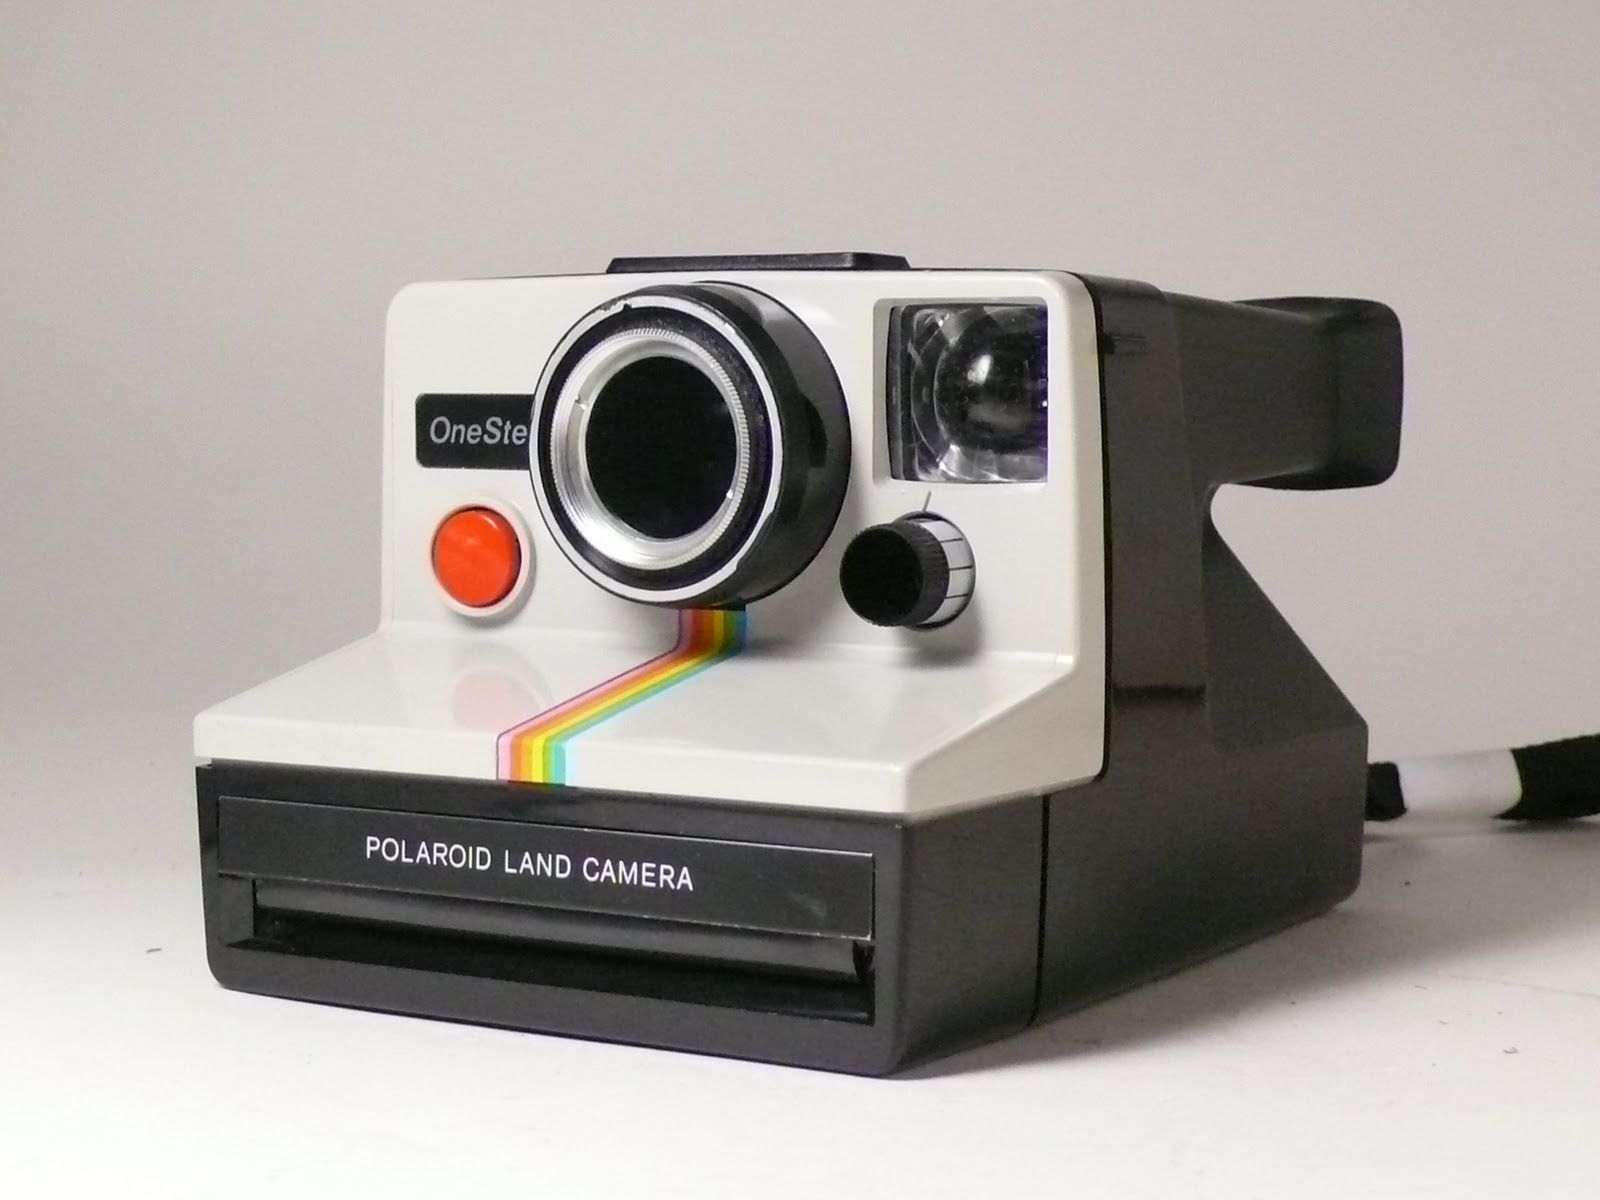 Getting the Most Out of Your Polaroid Camera